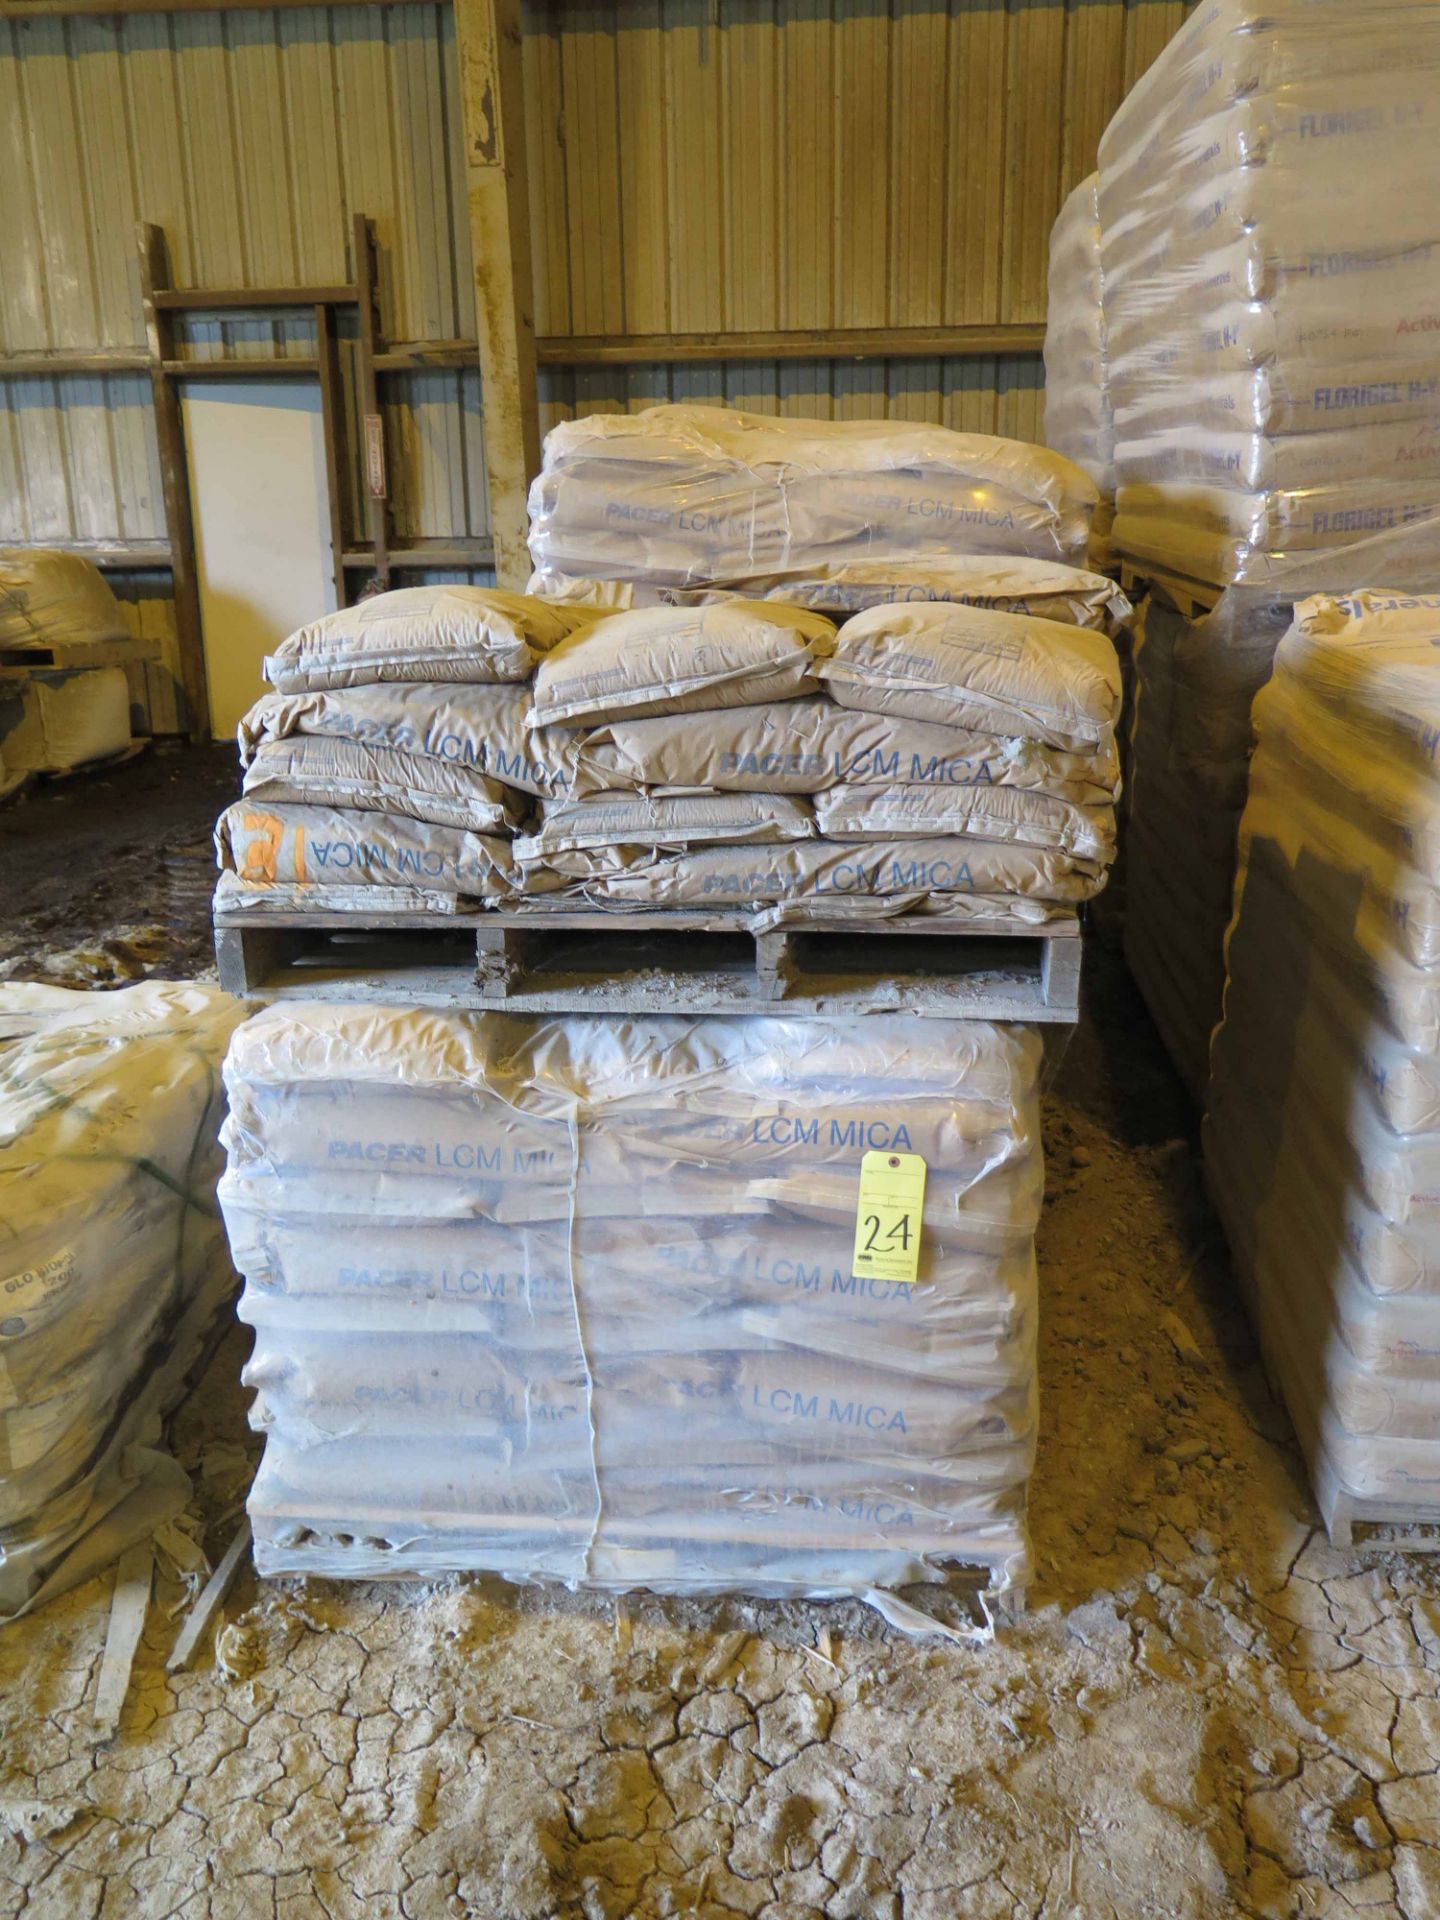 LOT OF MICA FINE (approx. 463 bags) (Location #1: 374 Walter White Road, Trinity, TX 75862)